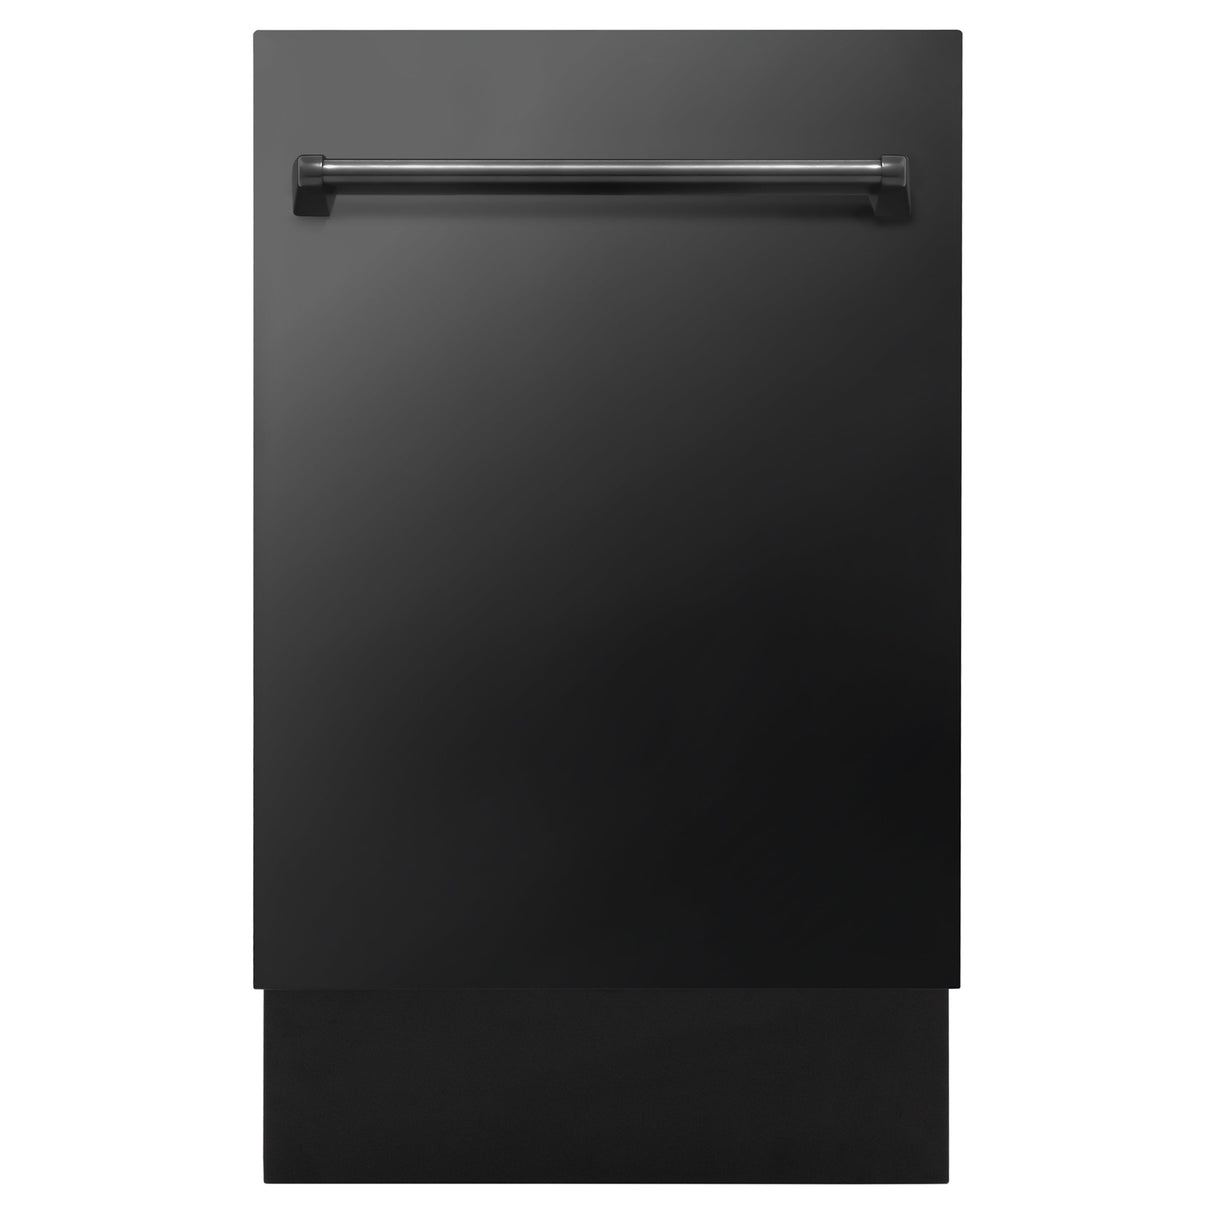 ZLINE 18 in. Tallac Series 3rd Rack Top Control Dishwasher with a Stainless Steel Tub with Black Stainless Panel, 51dBa (DWV-BS-18)